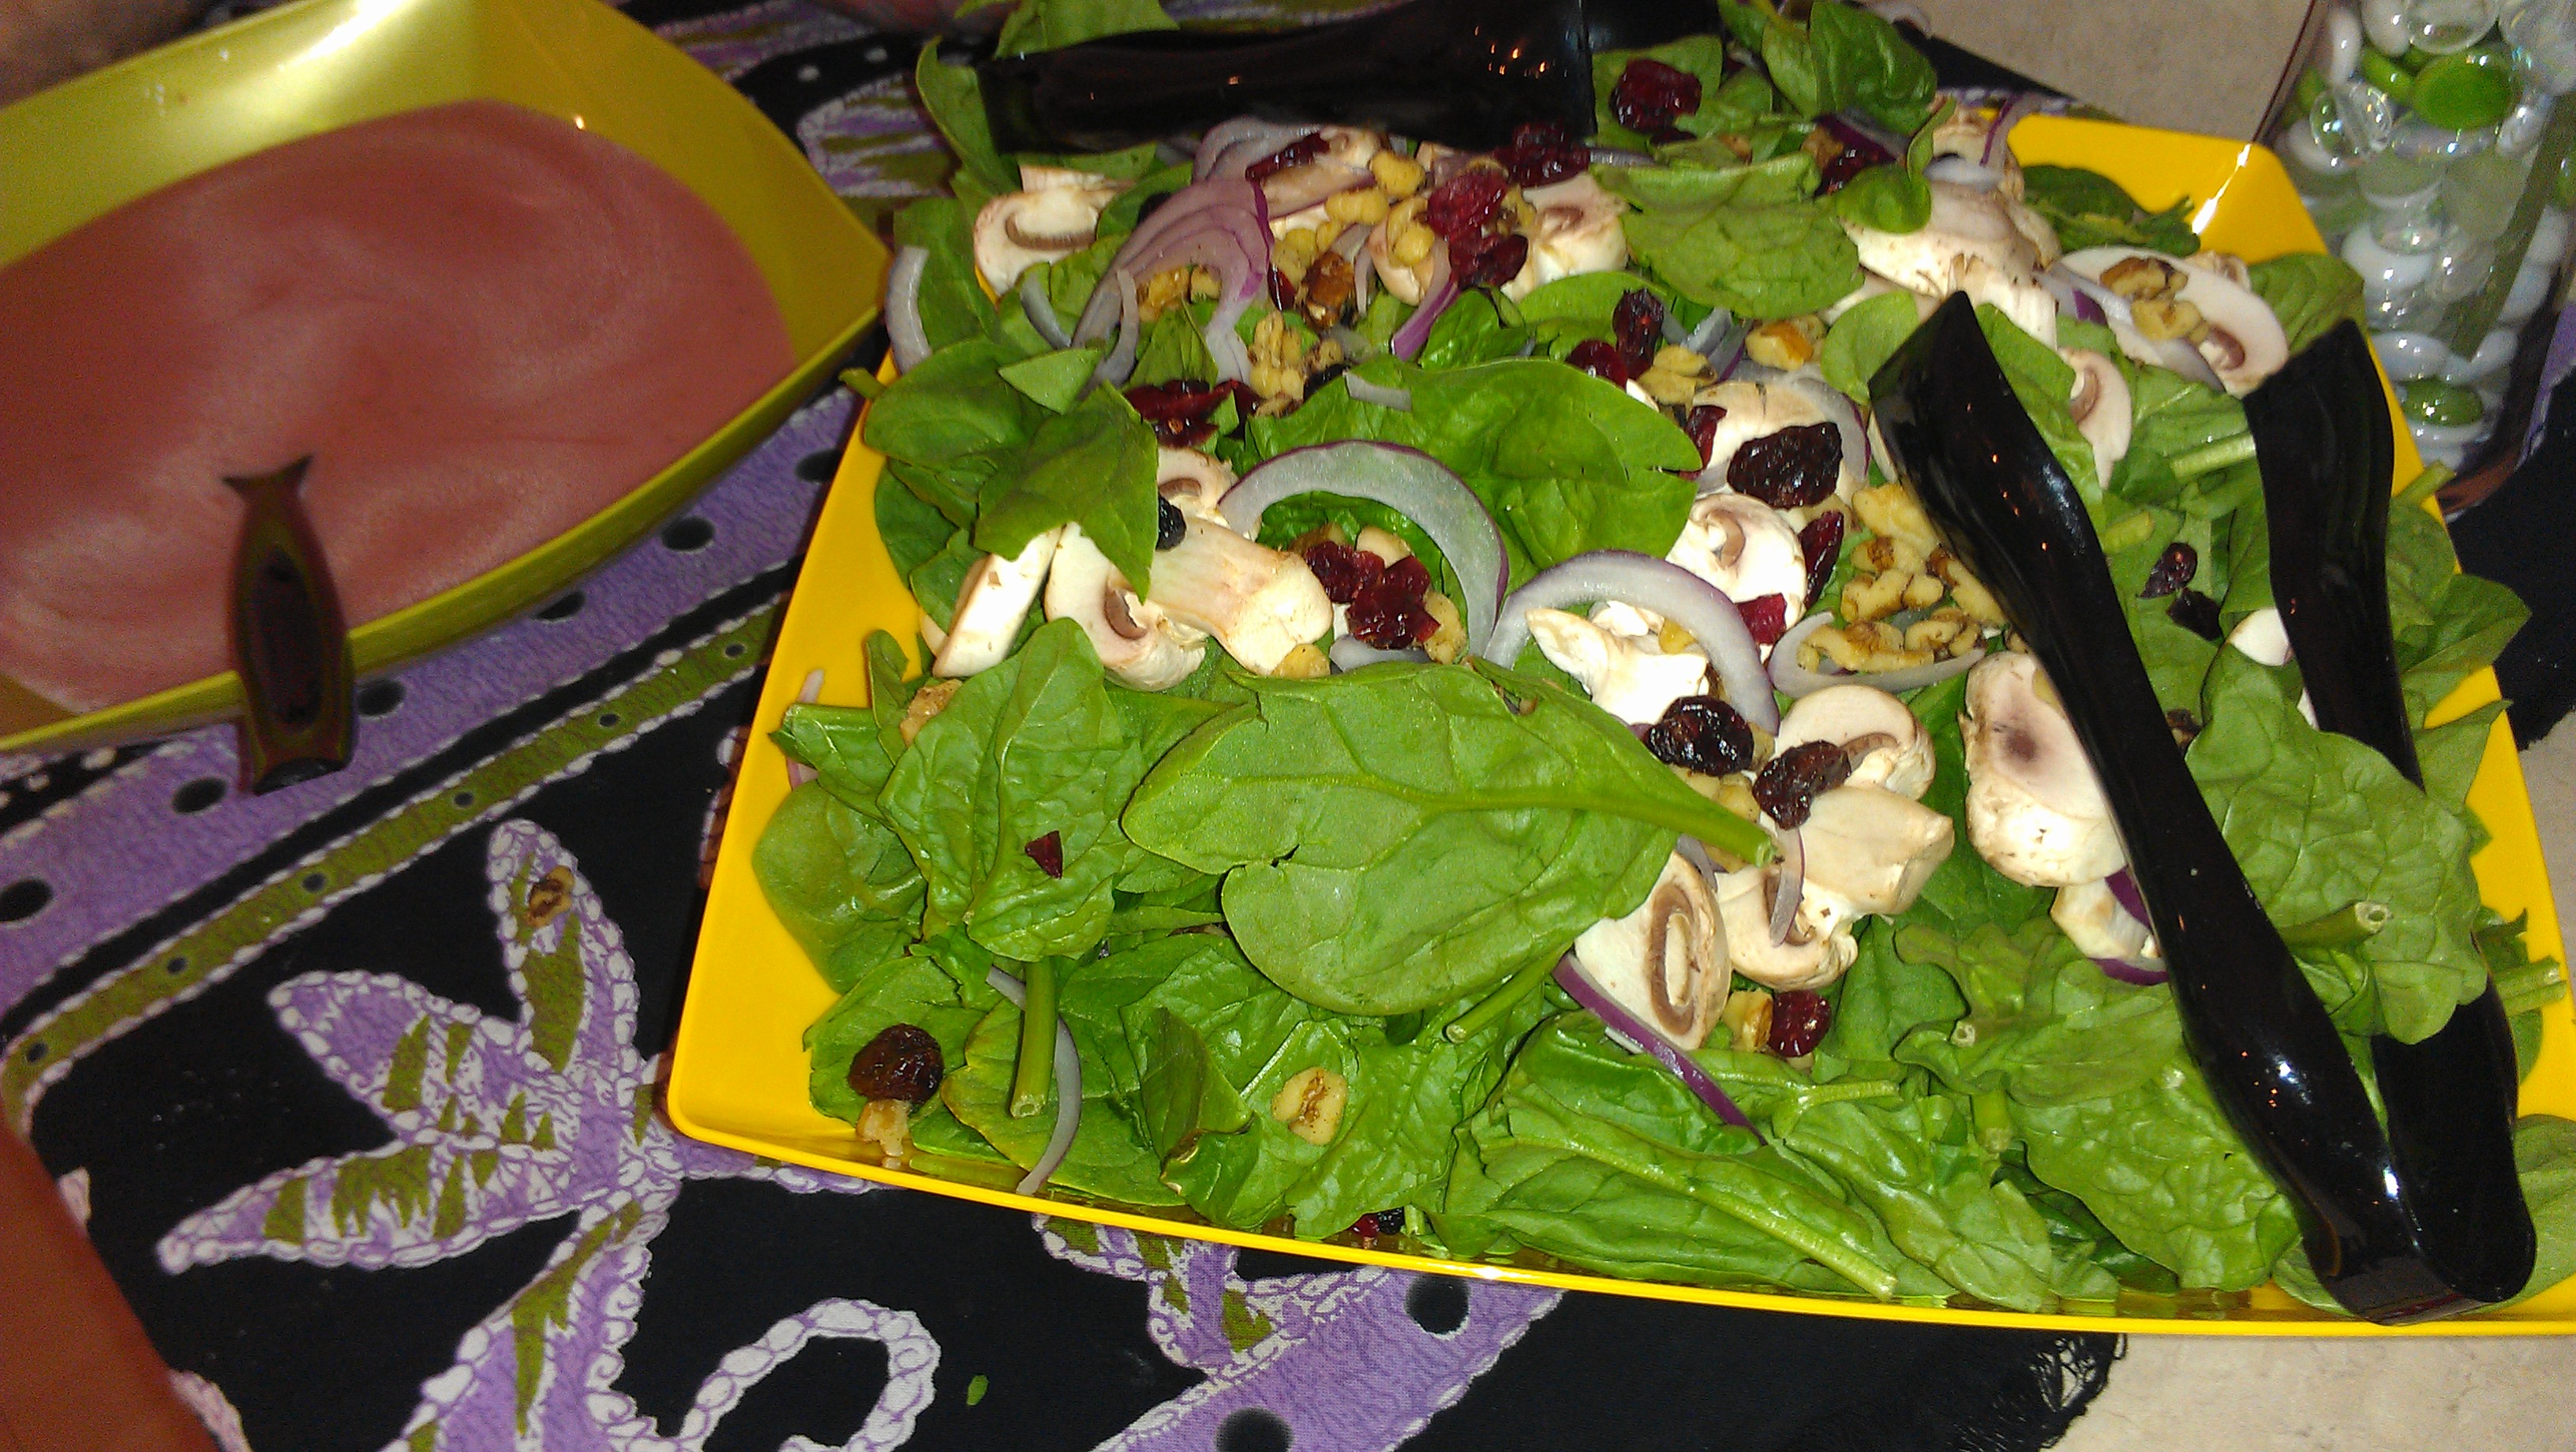 Spinach salad and strawberry vinaigrette pic